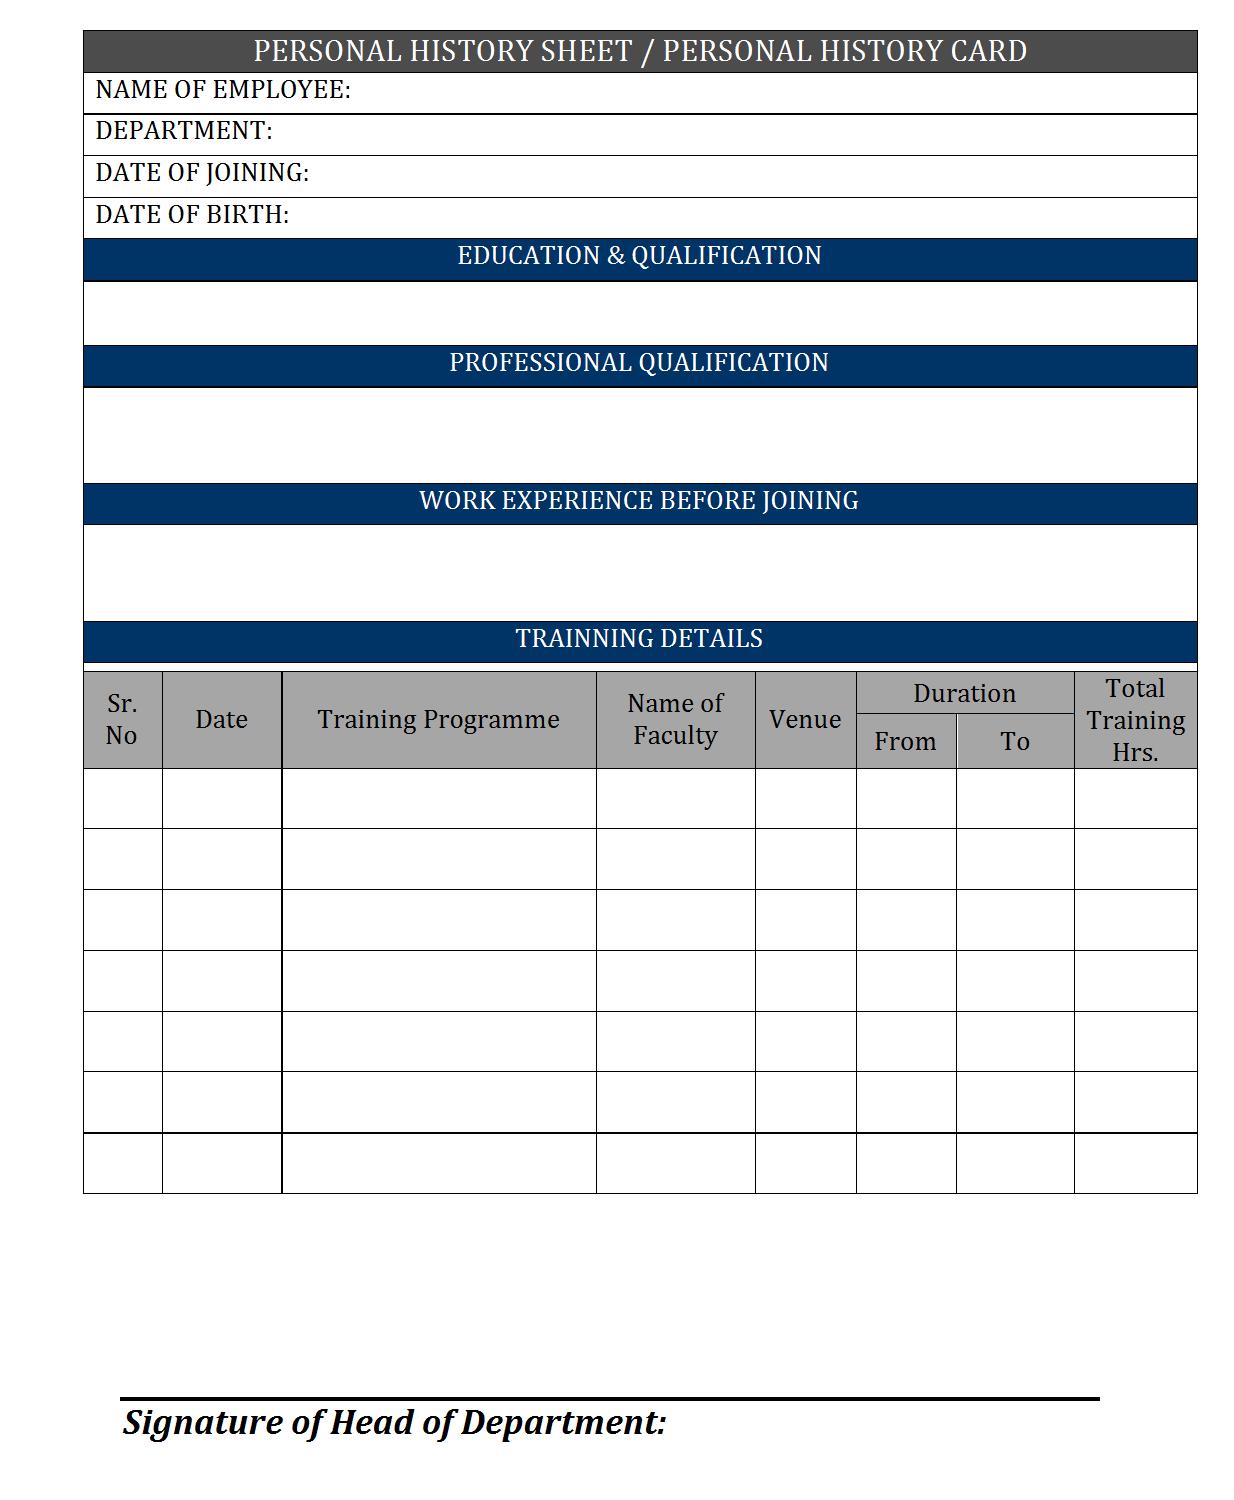 employee History Card format  Report  Samples  Word Document With Regard To Employee Card Template Word